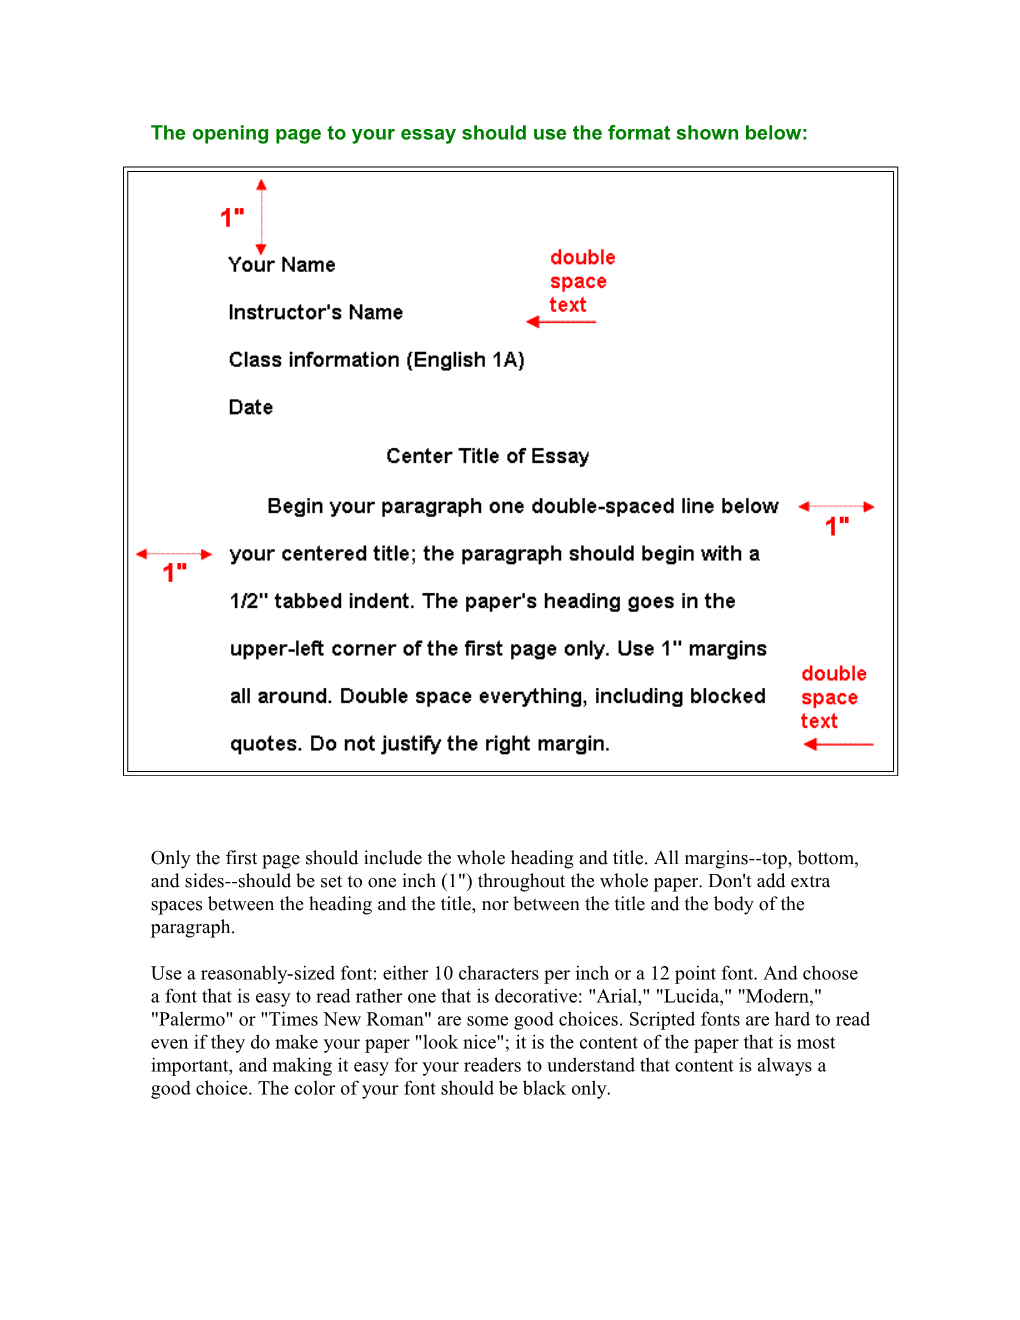 The Opening Page to Your Essay Should Use the Format Shown Below